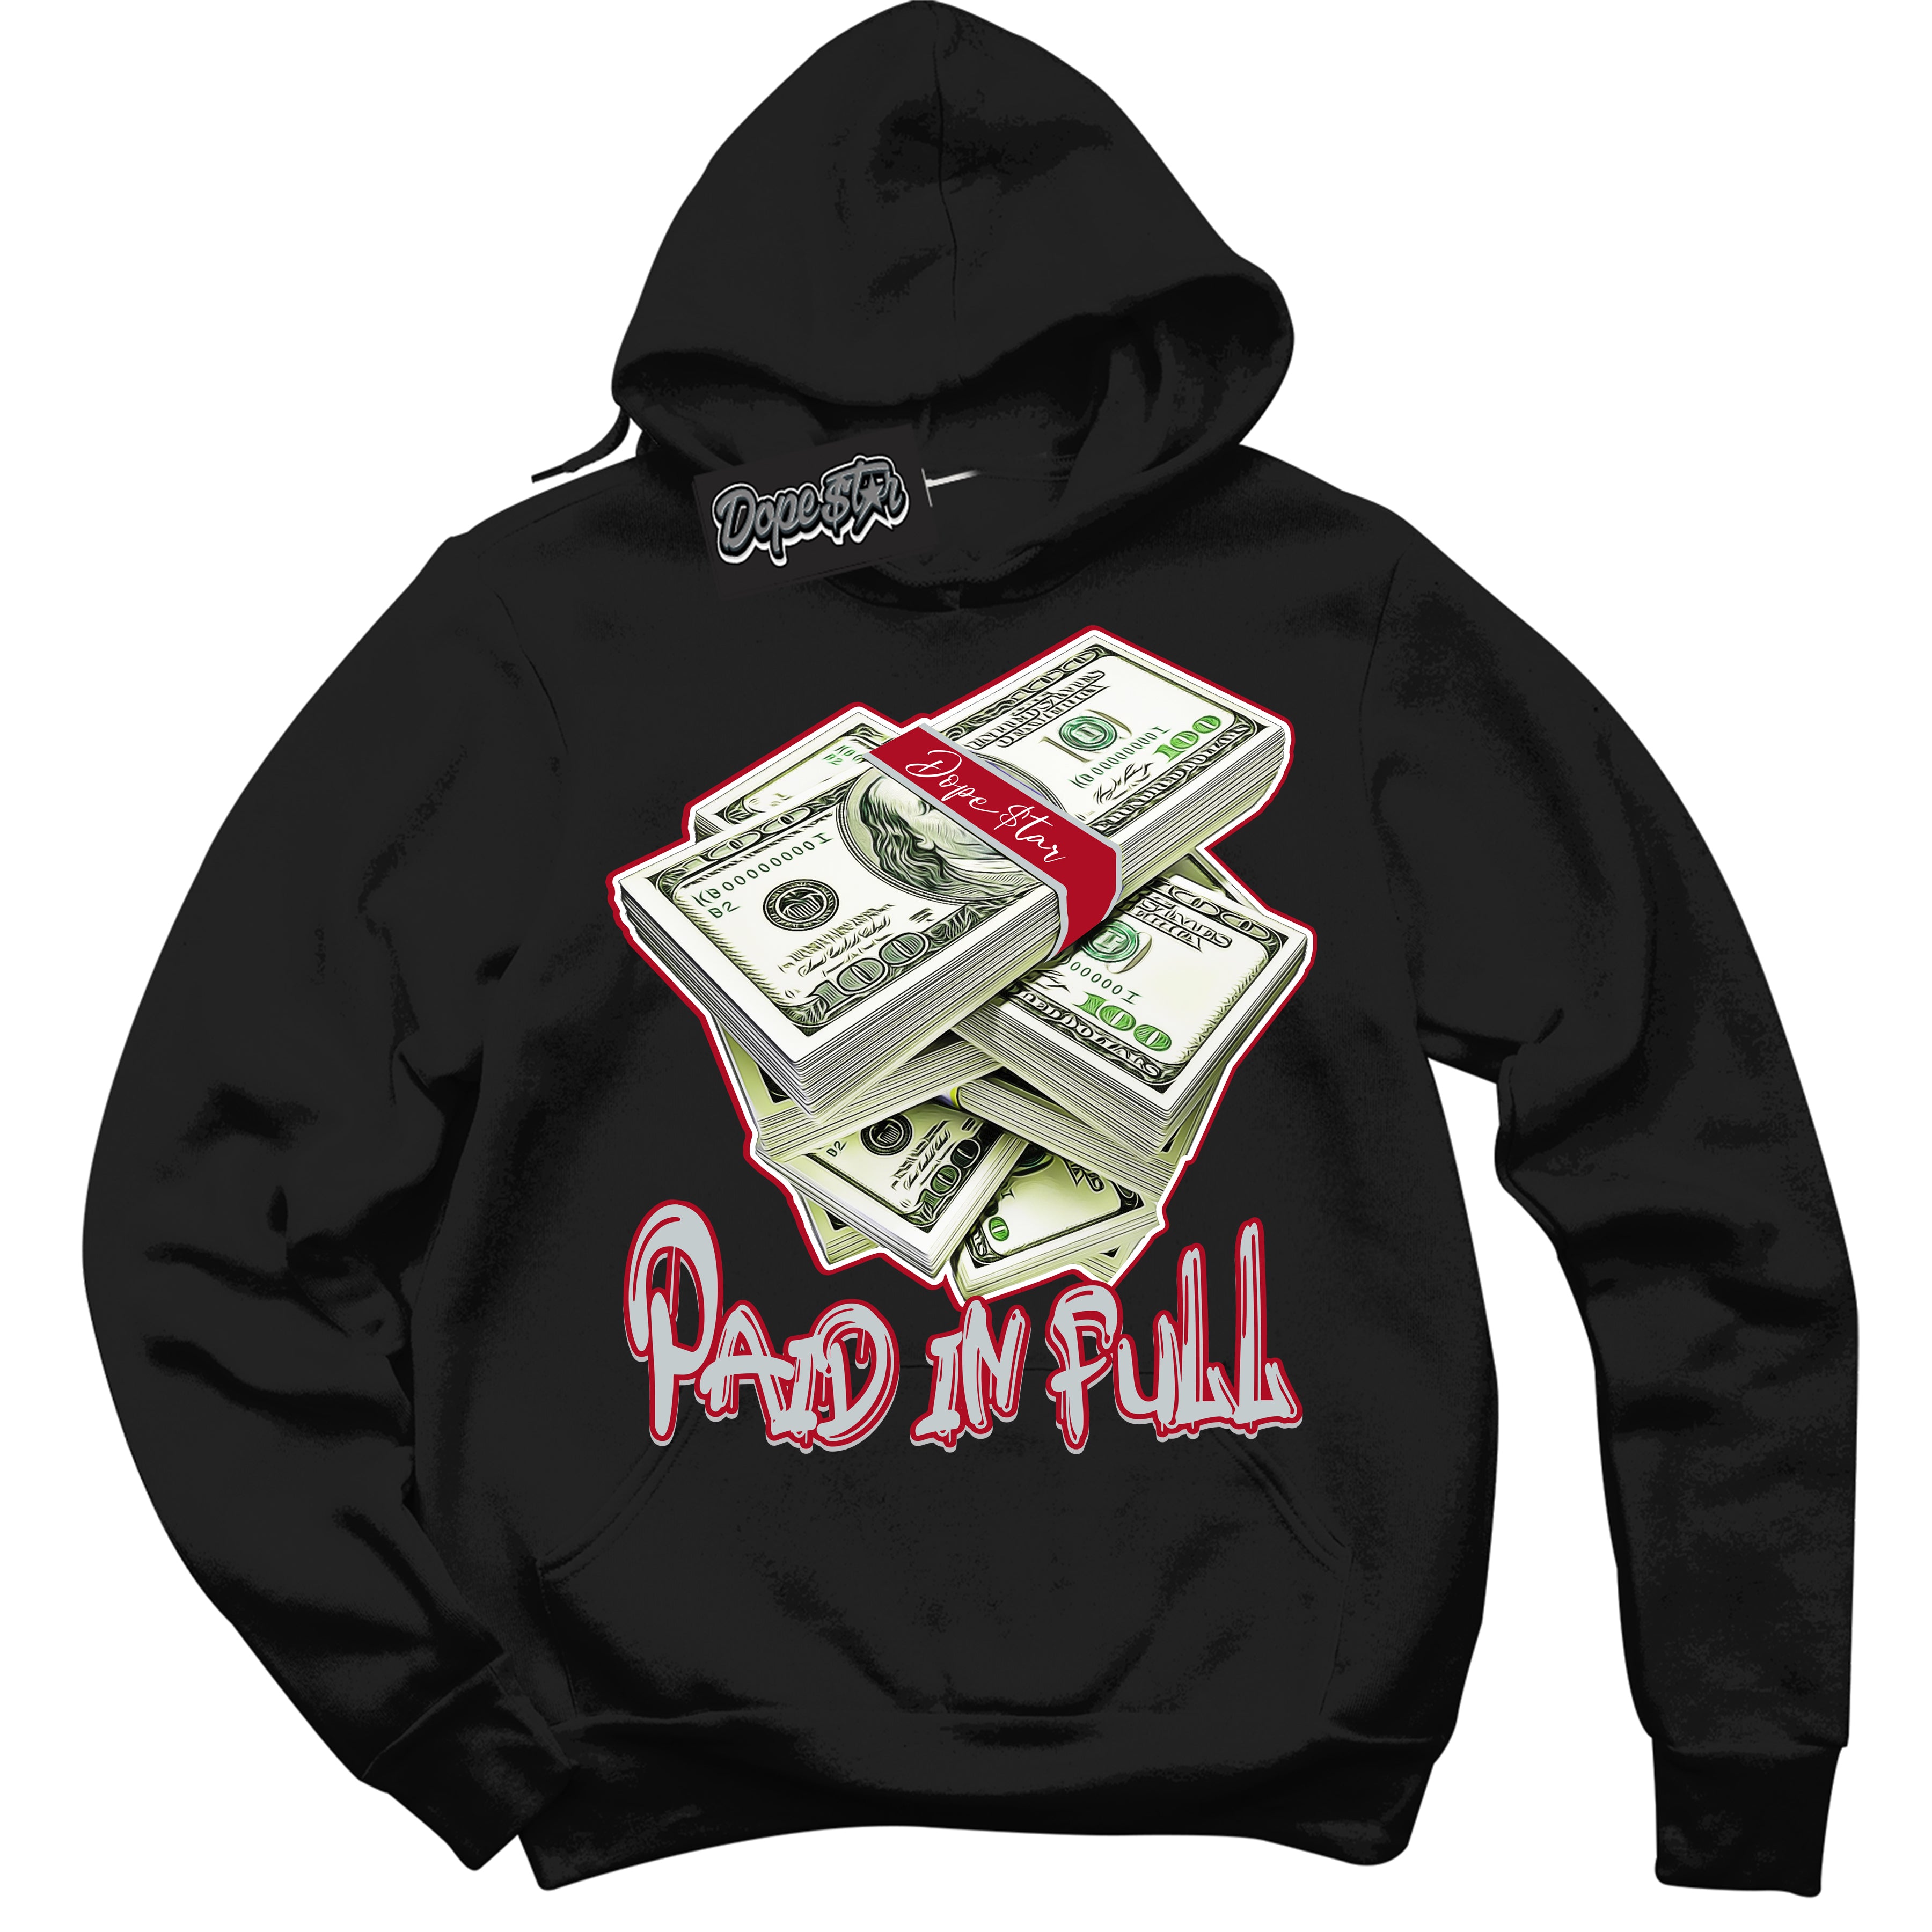 Cool Black Hoodie with “ Paid In Full ”  design that Perfectly Matches  Reverse Ultraman Sneakers.